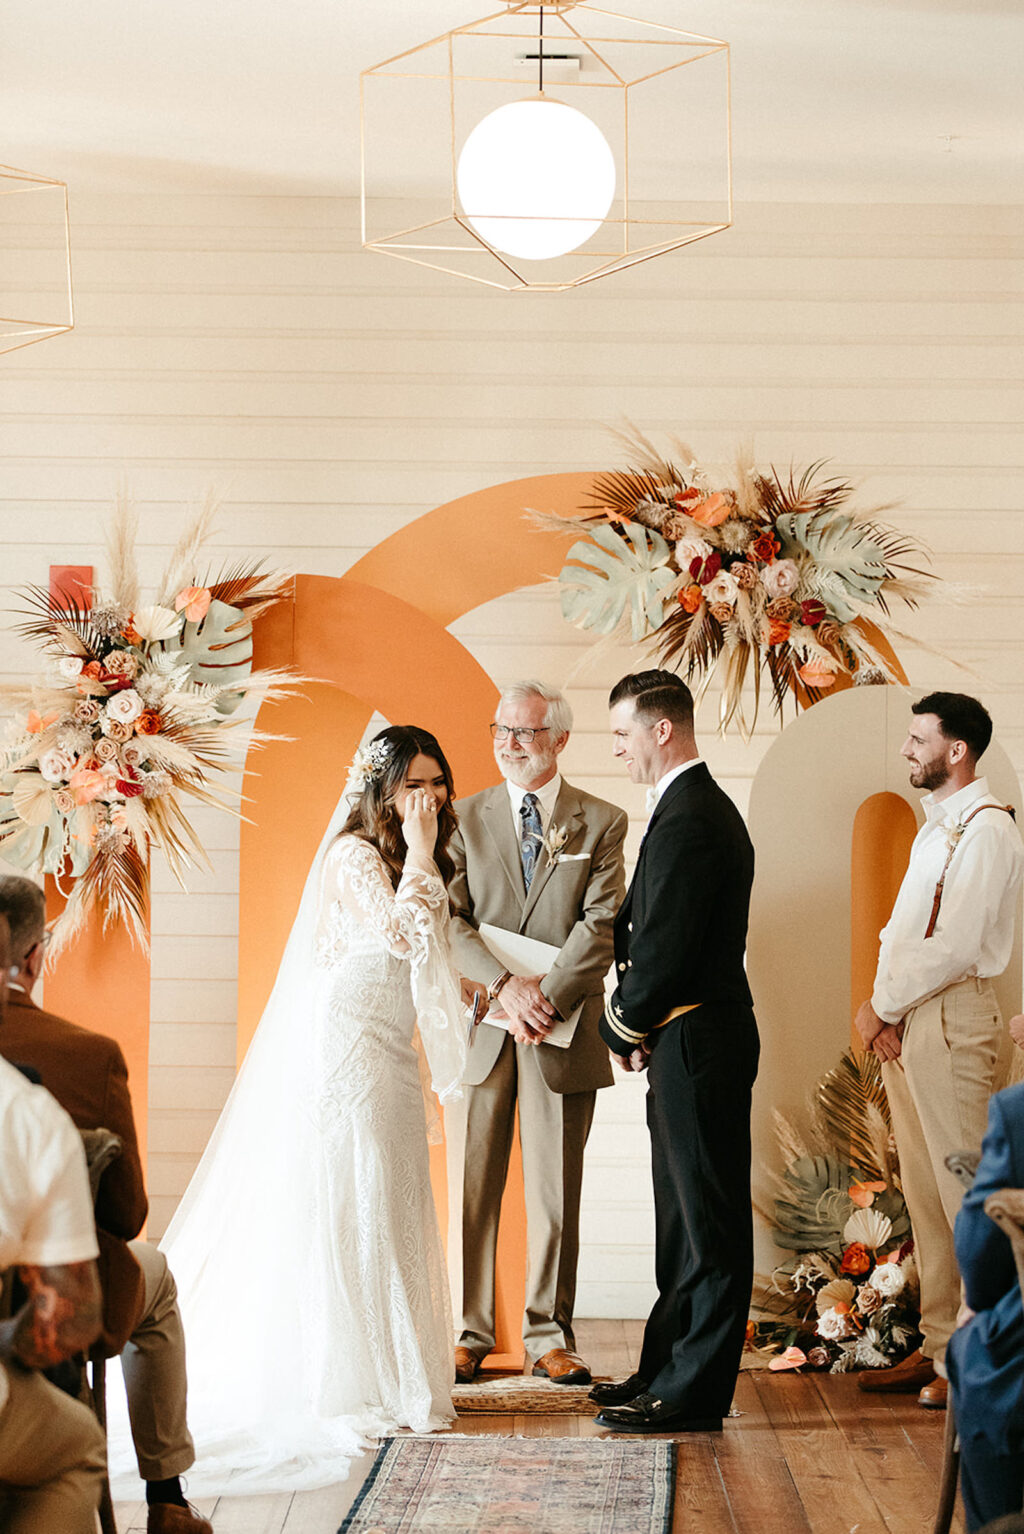 Earthy Neutral Boho Modern Chic Wedding, Emotional Bride and Groom Exchanging Wedding Vows, Arched Terracotta and Cream Panel Backdrops with Lush Floral Bouquets | Tampa Bay Wedding Planner Wilder Mind Events | Wedding Florist Save the Date Florida